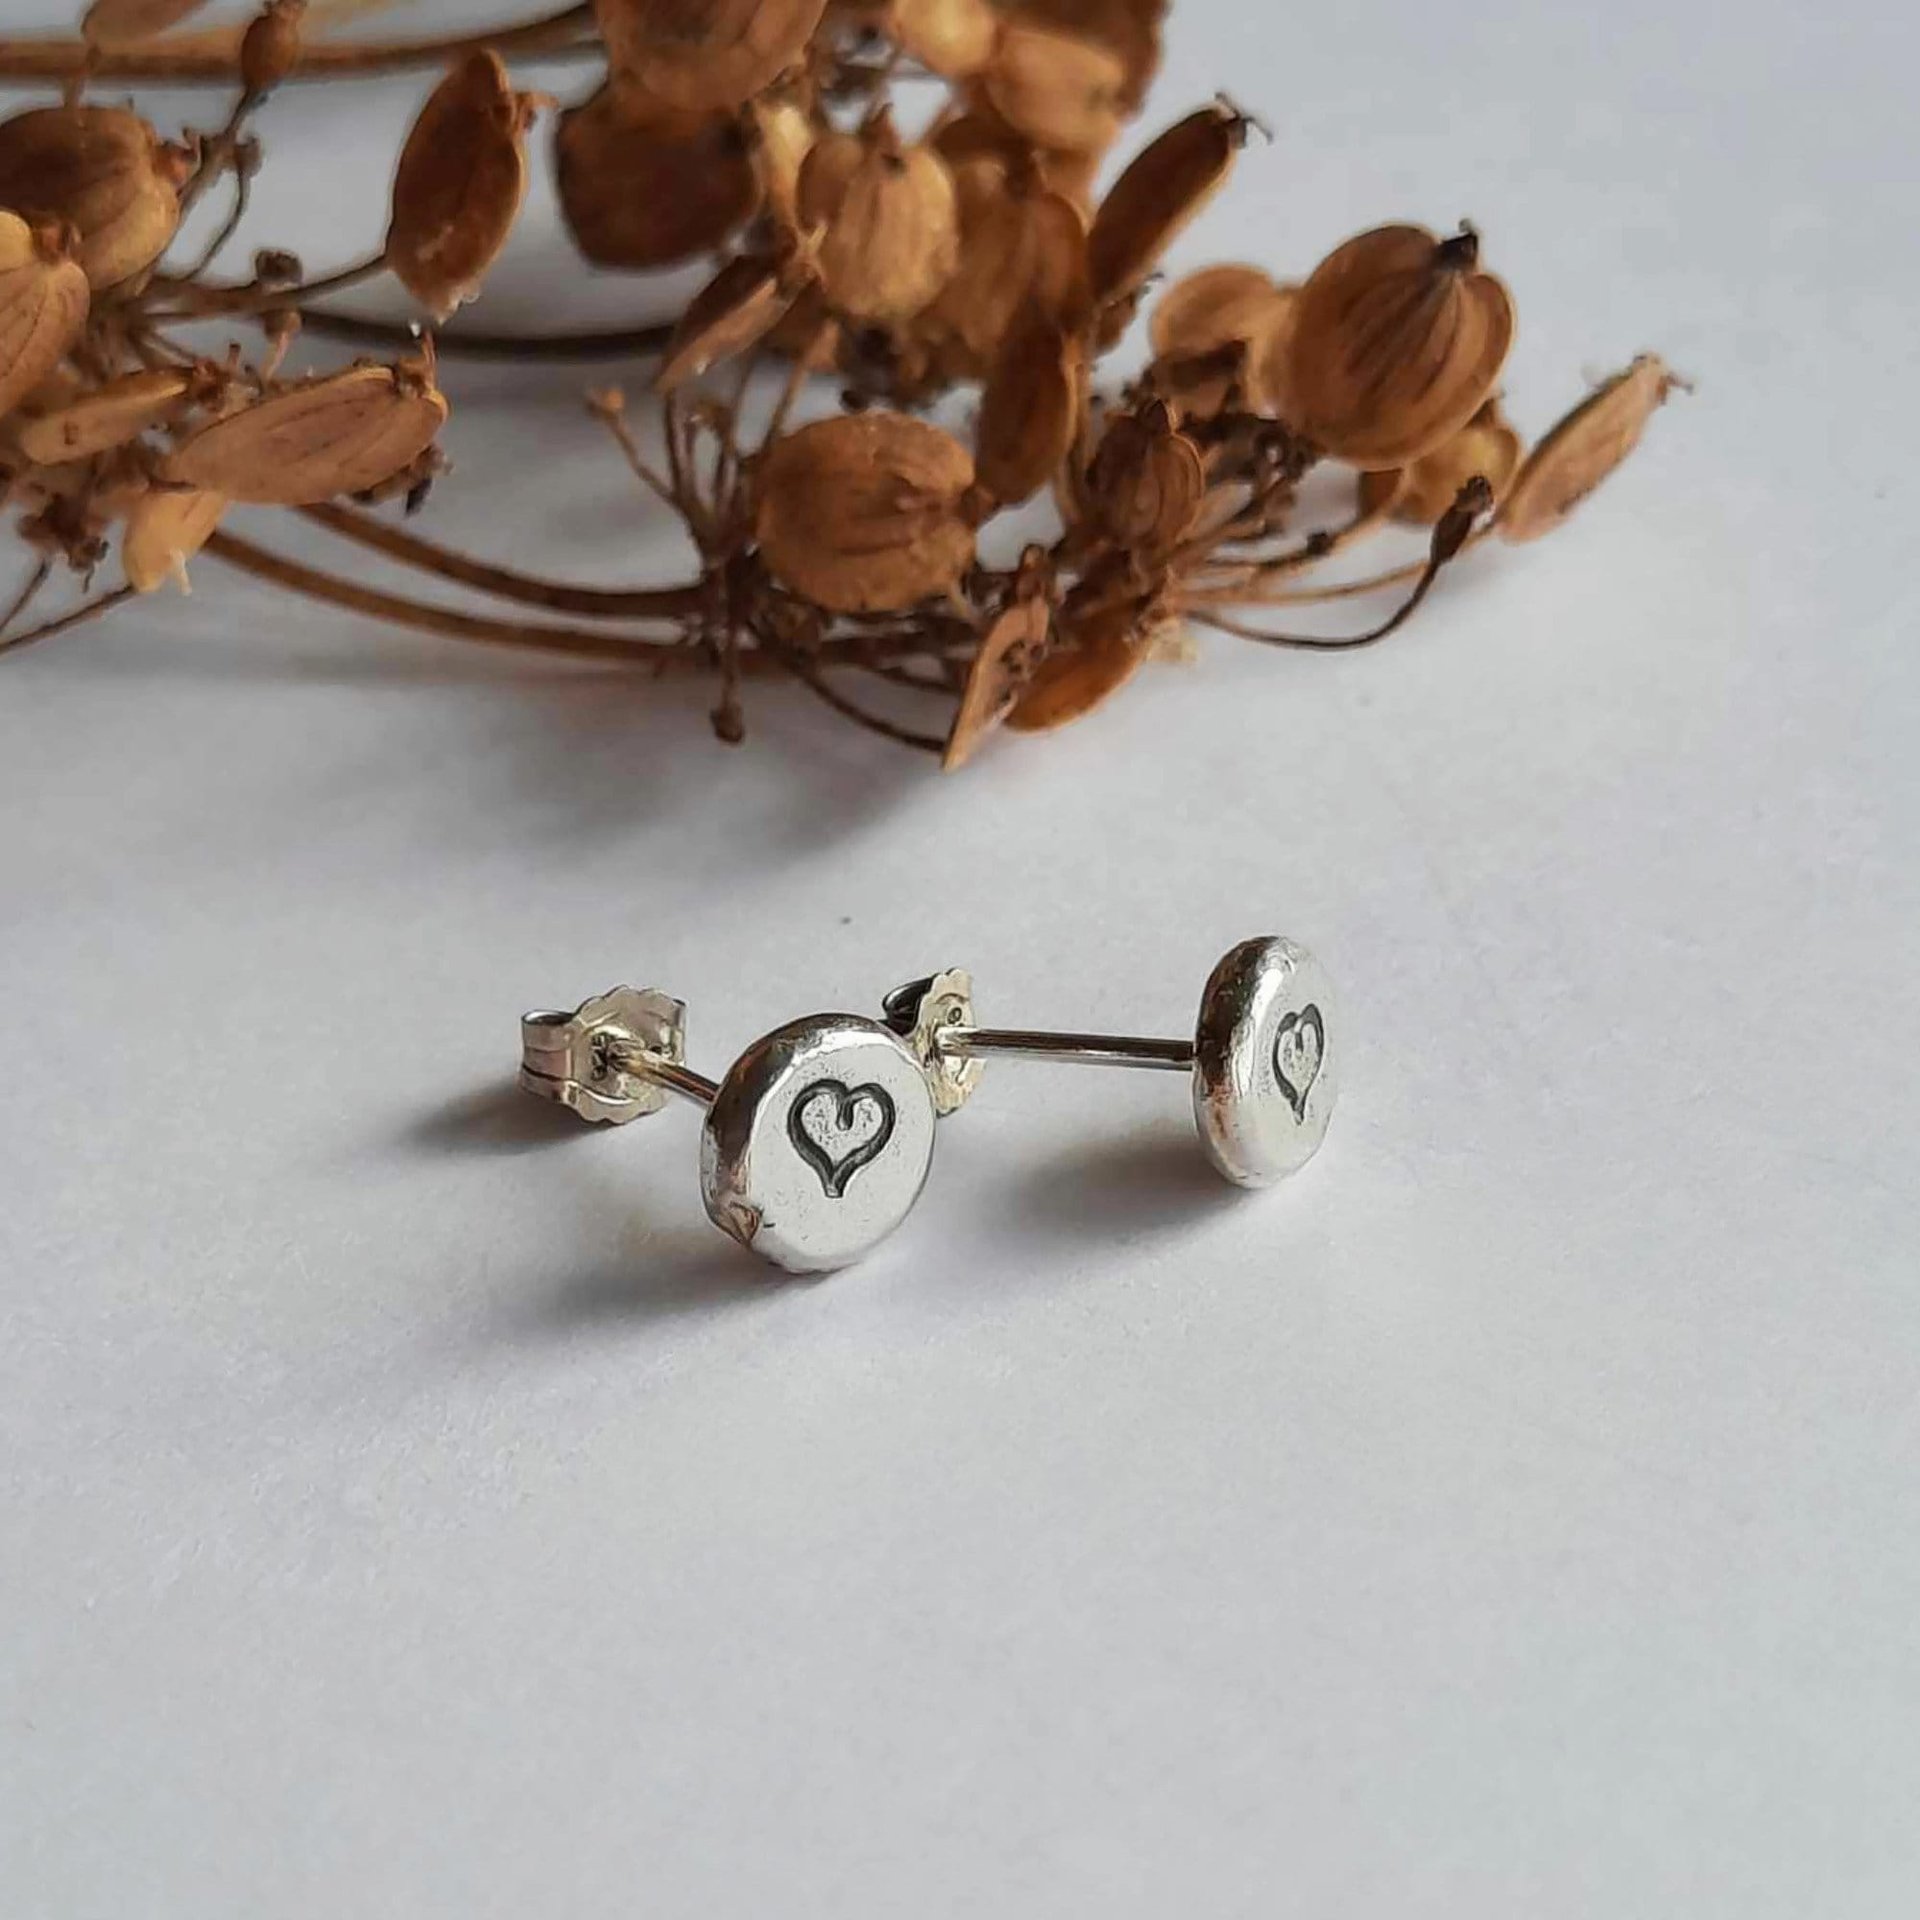 Recycled sterling silver hand stamped love heart stud earrings, hand crafted by The Tiny Tree Frog Jewellery